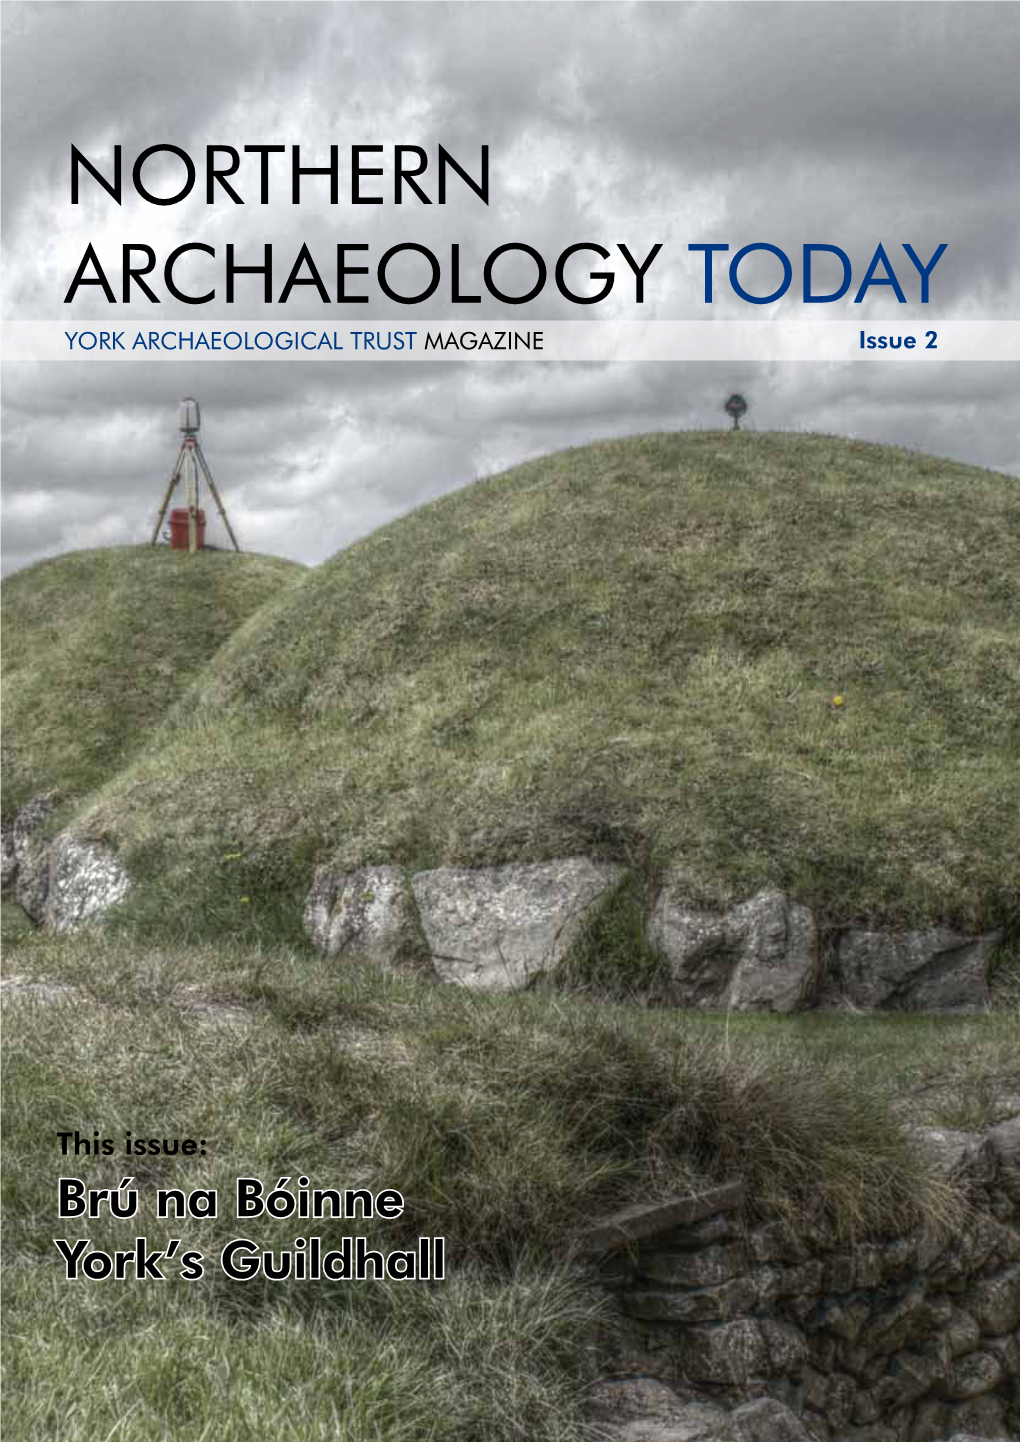 NORTHERN ARCHAEOLOGY TODAY YORK ARCHAEOLOGICAL TRUST MAGAZINE Issue 2